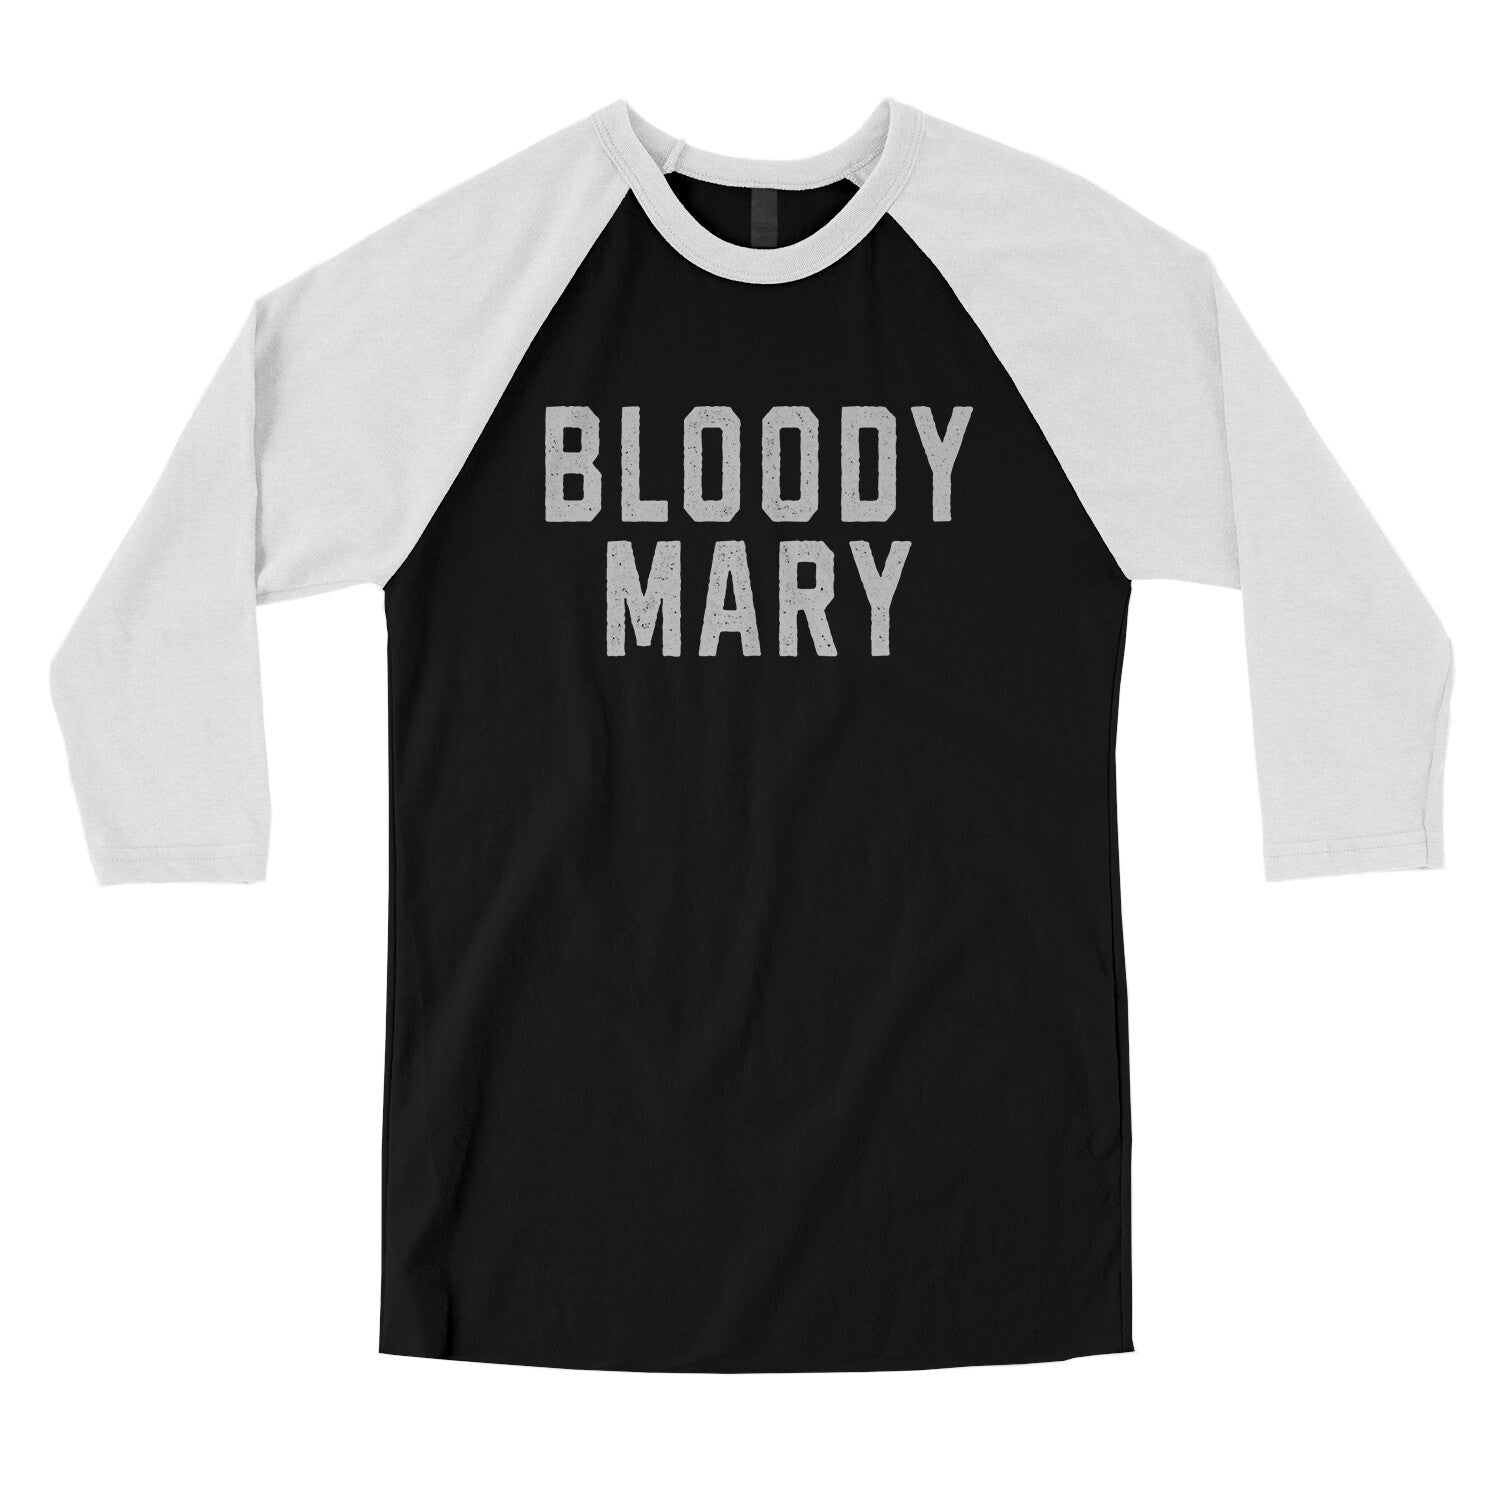 Bloody Mary in Black with White Color